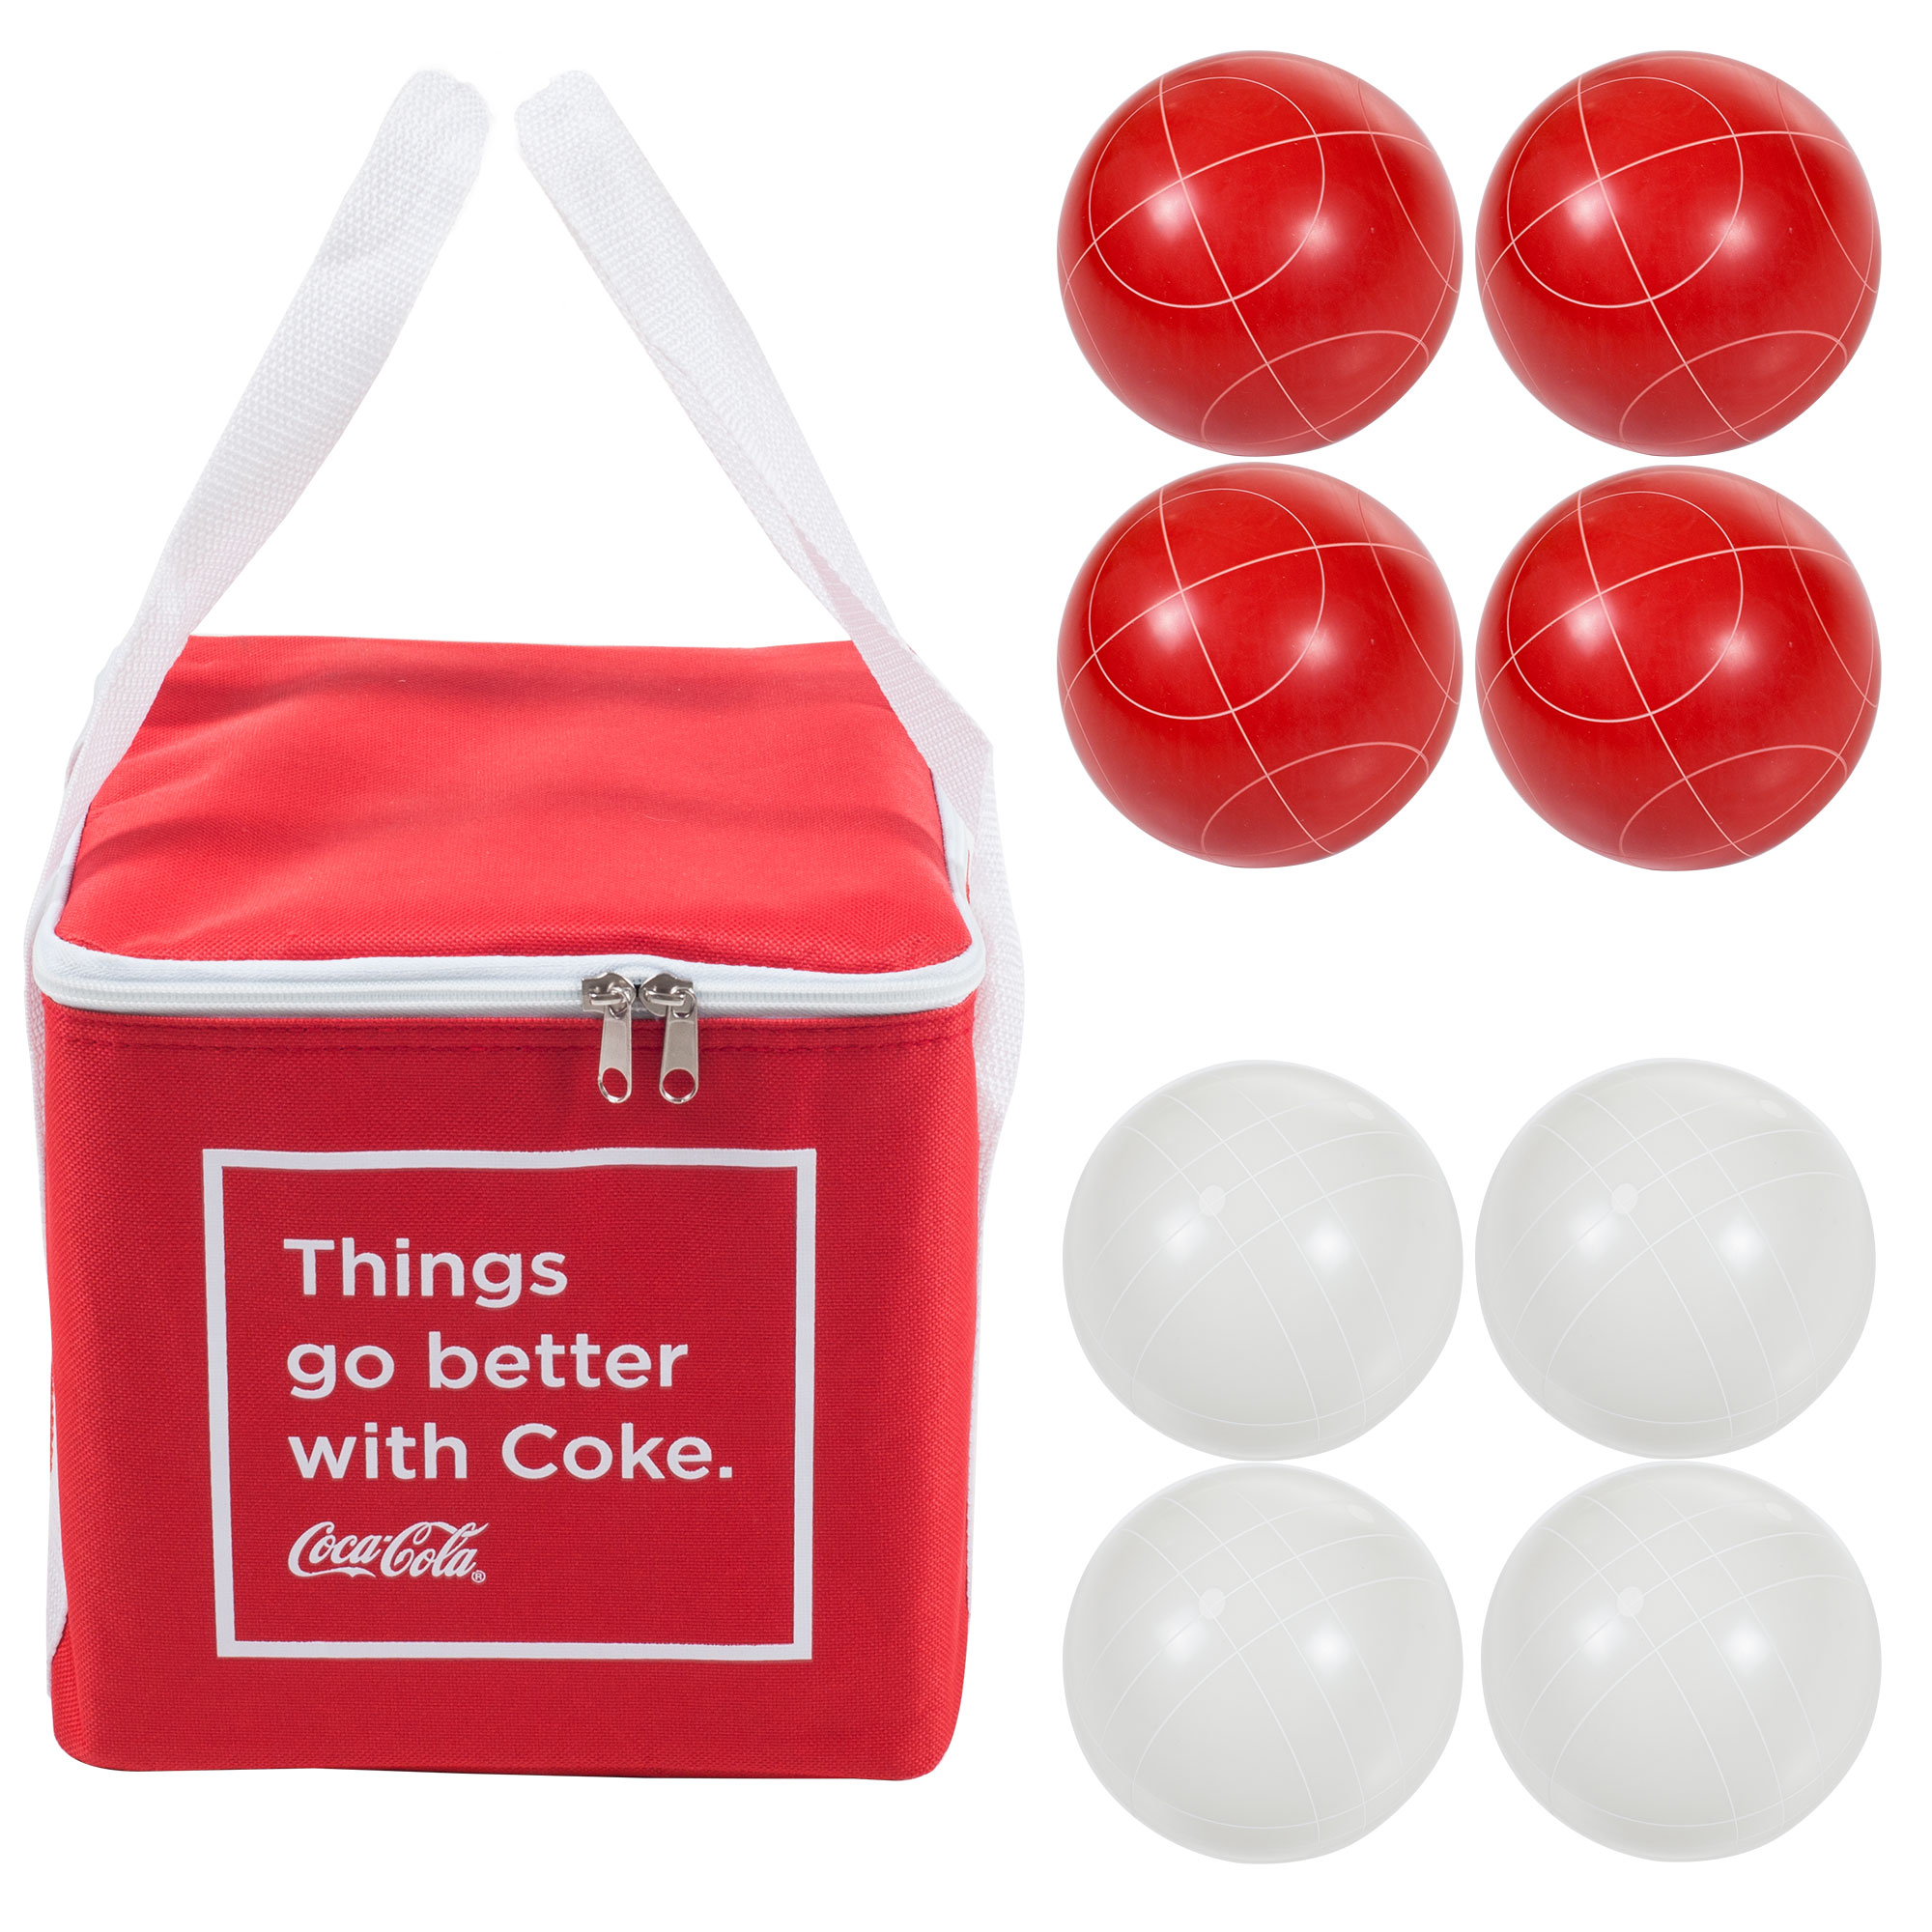 Bocce Ball Set- Regulation Outdoor Family Bocce Game by Hey! Play! (Coca Cola) - image 2 of 2